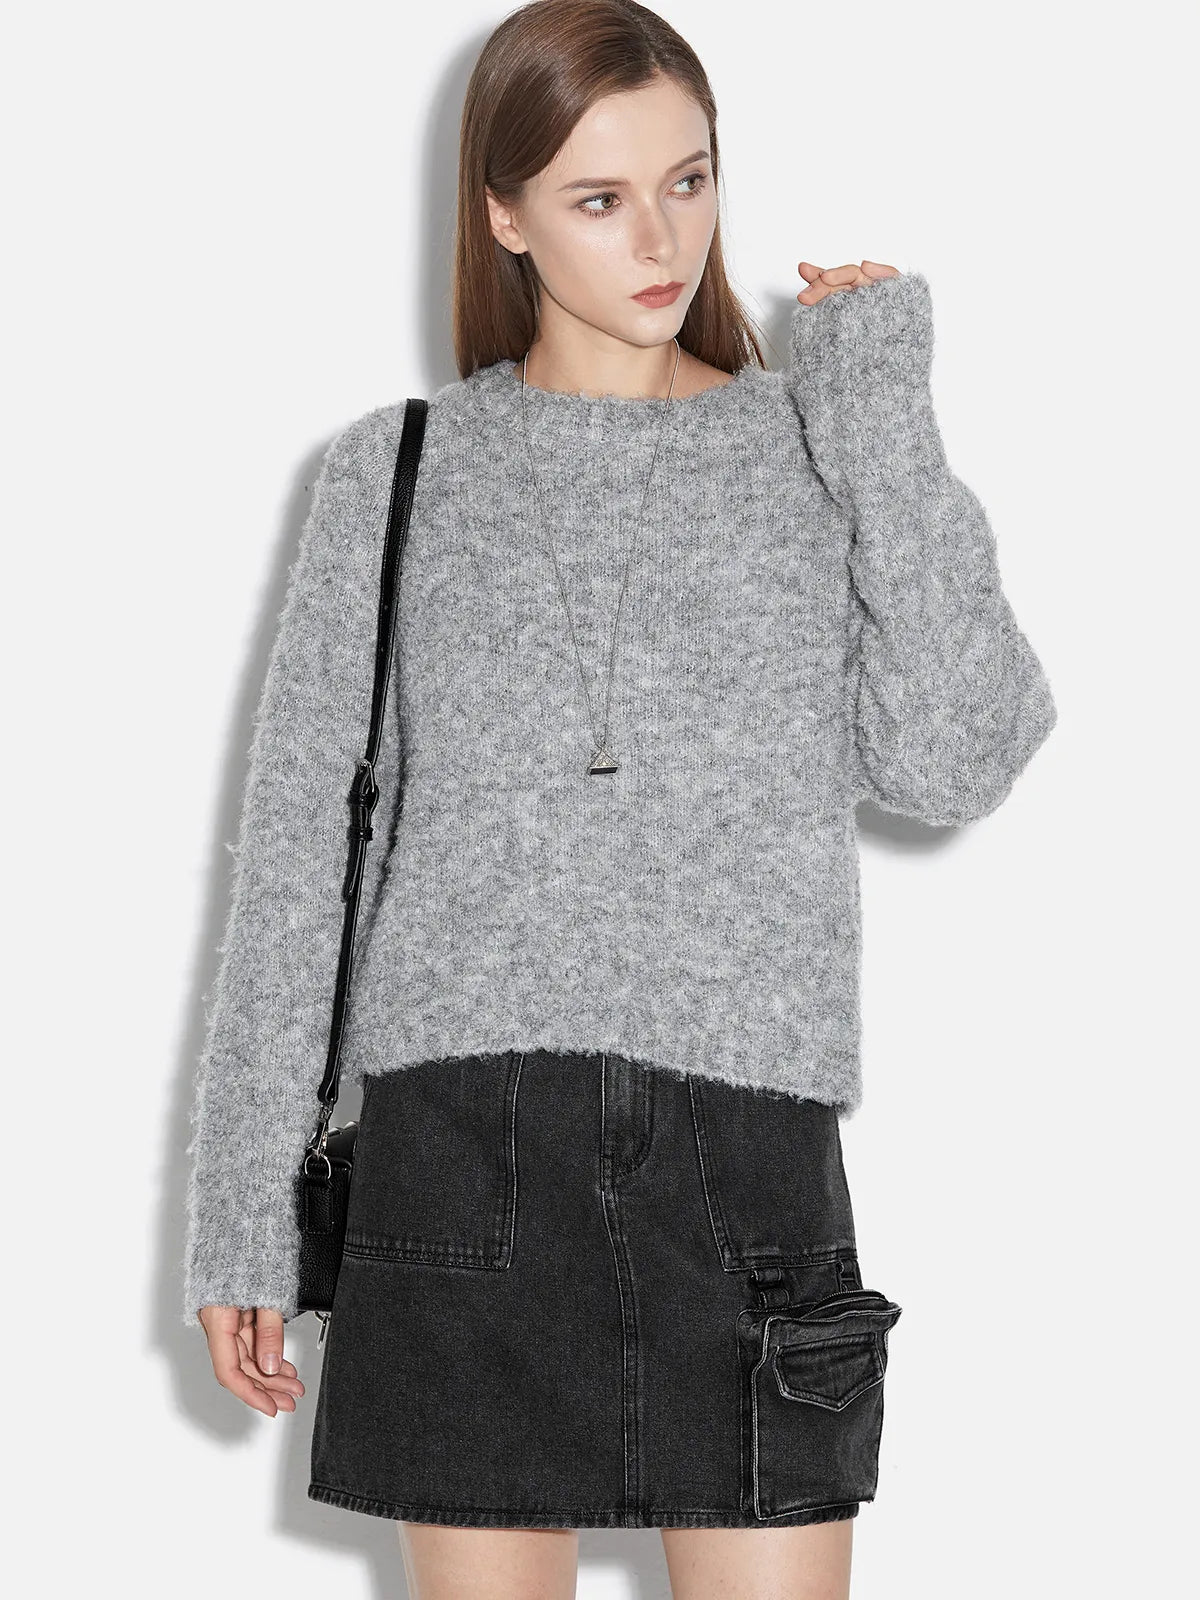 Casual Round Neck Textured Wool Thick Gray Sweater